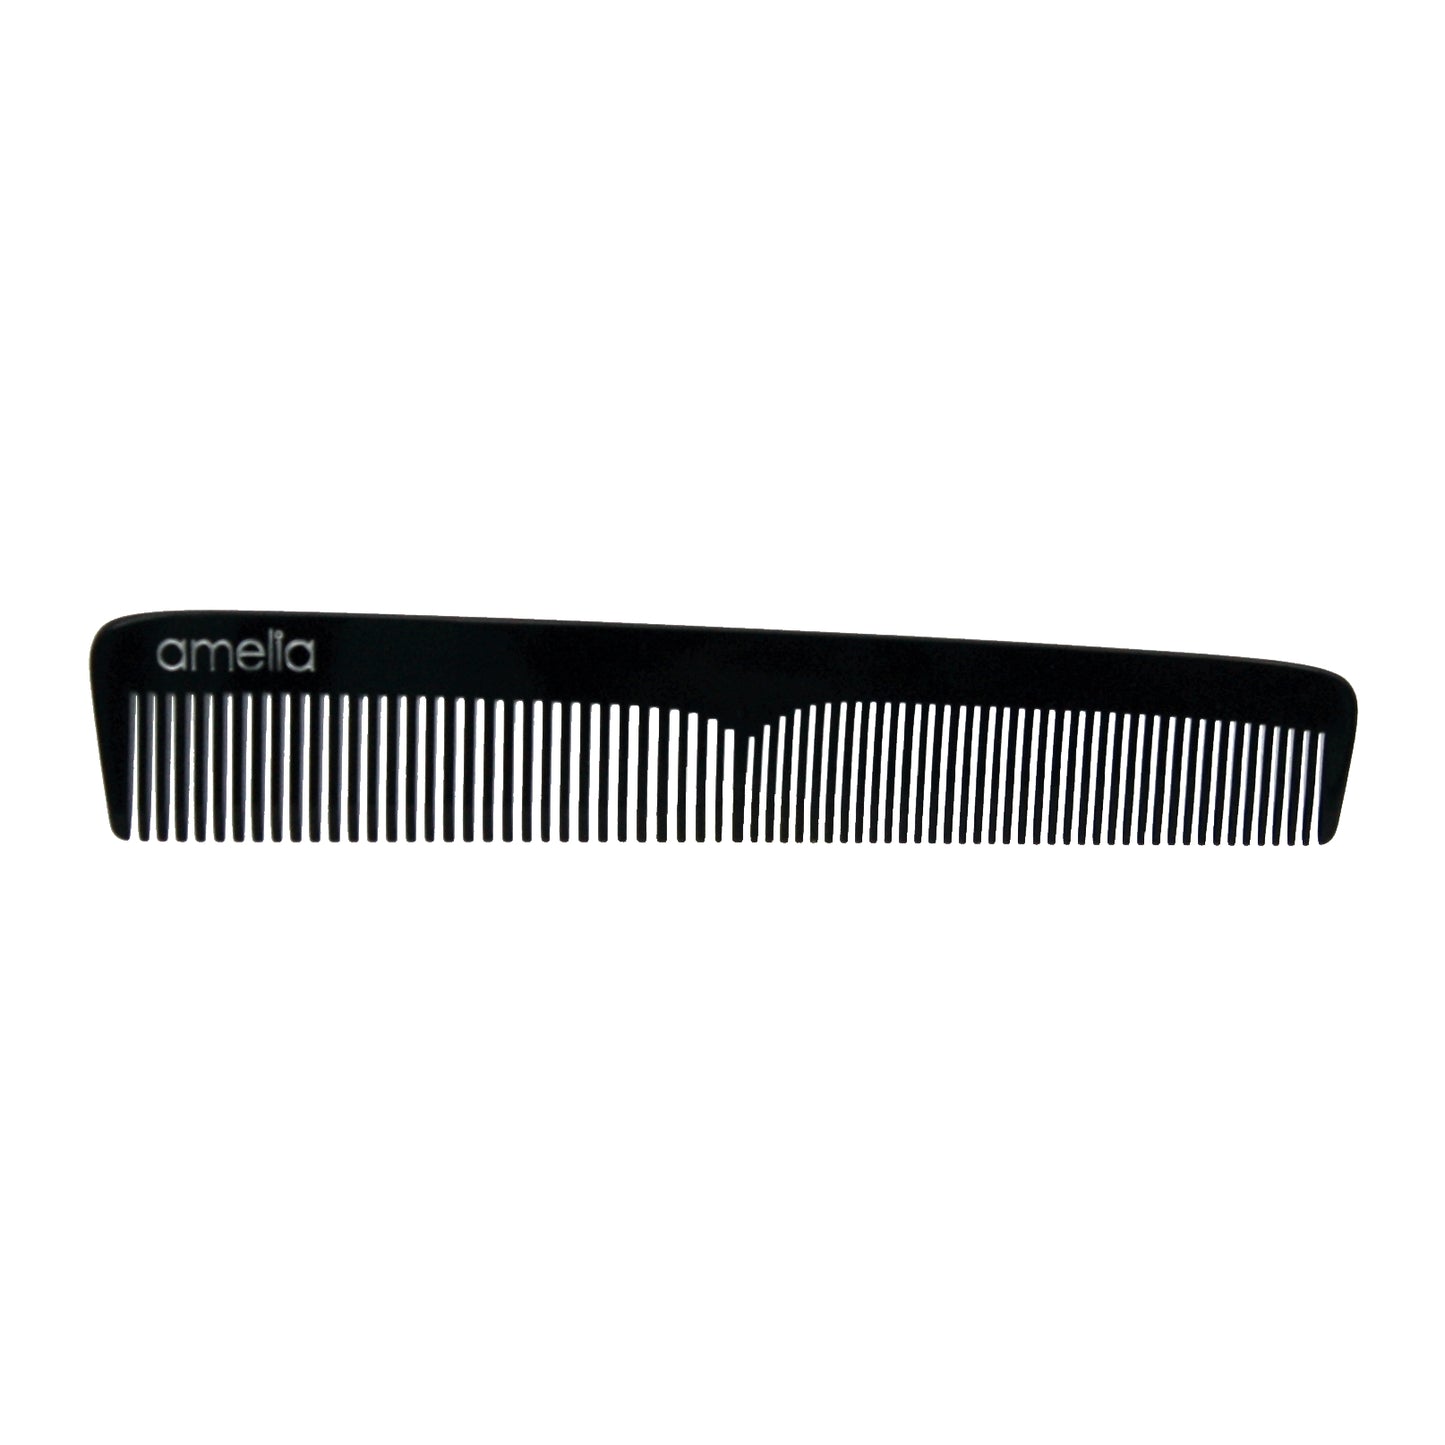 7in Cellulose Acetate Styling Comb - Black Color